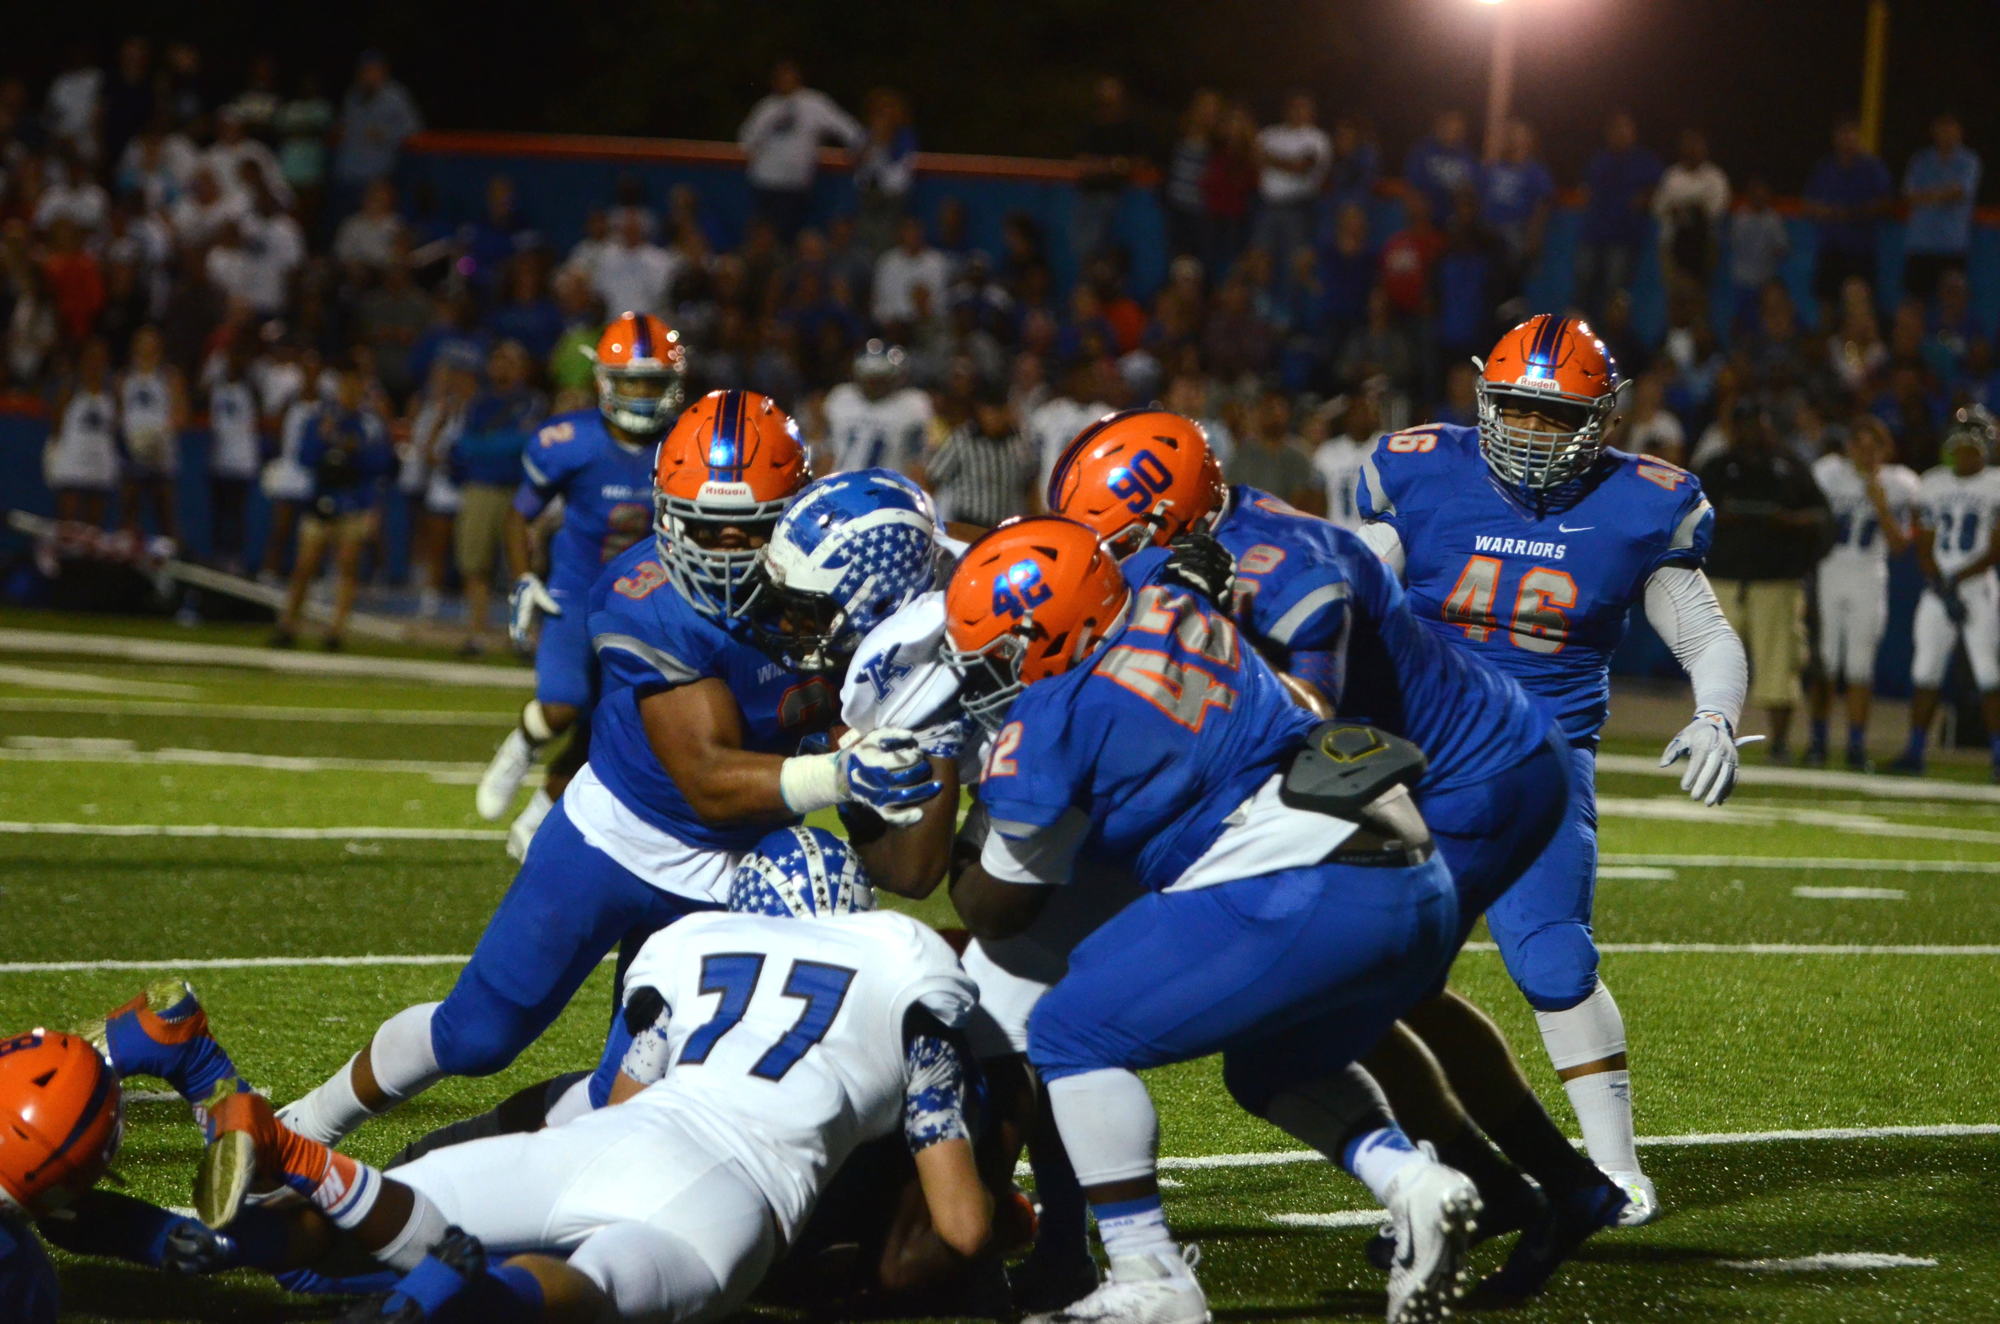 The Warriors defense limited Apopka to a combined 17 points in two meetings this season.